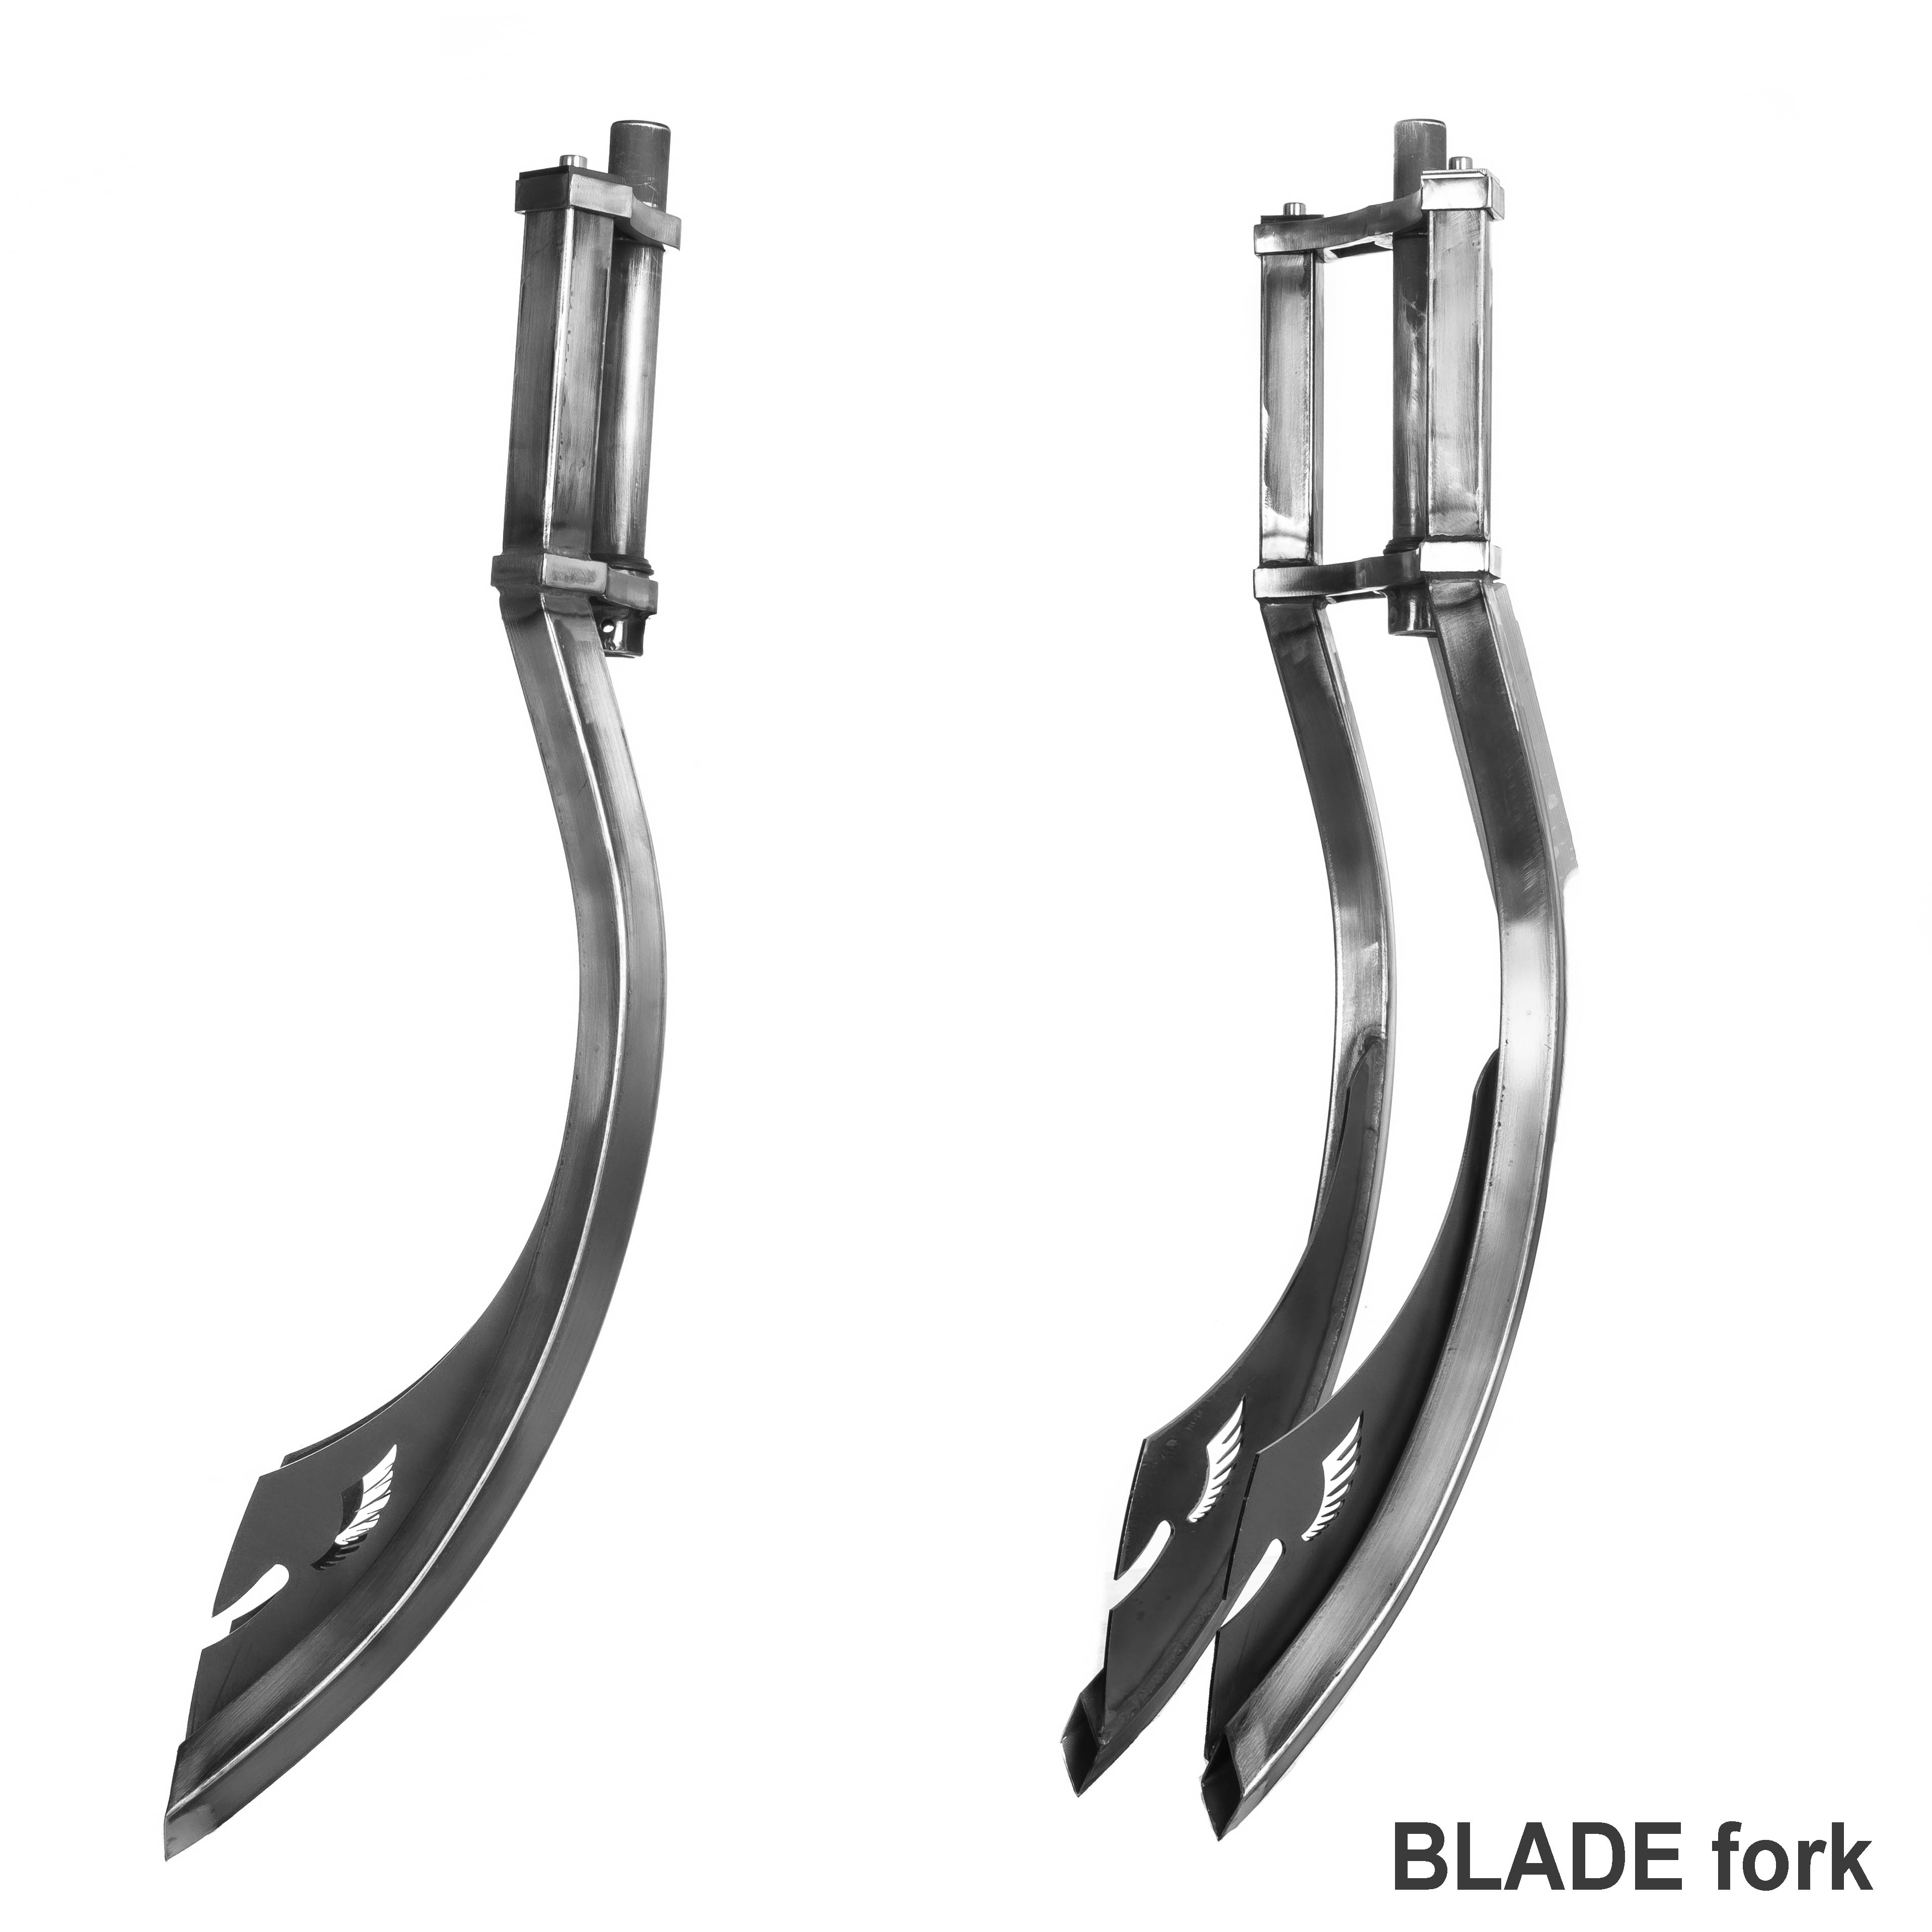 Blade Fork ALCB double crown, double down raw 1 1/8